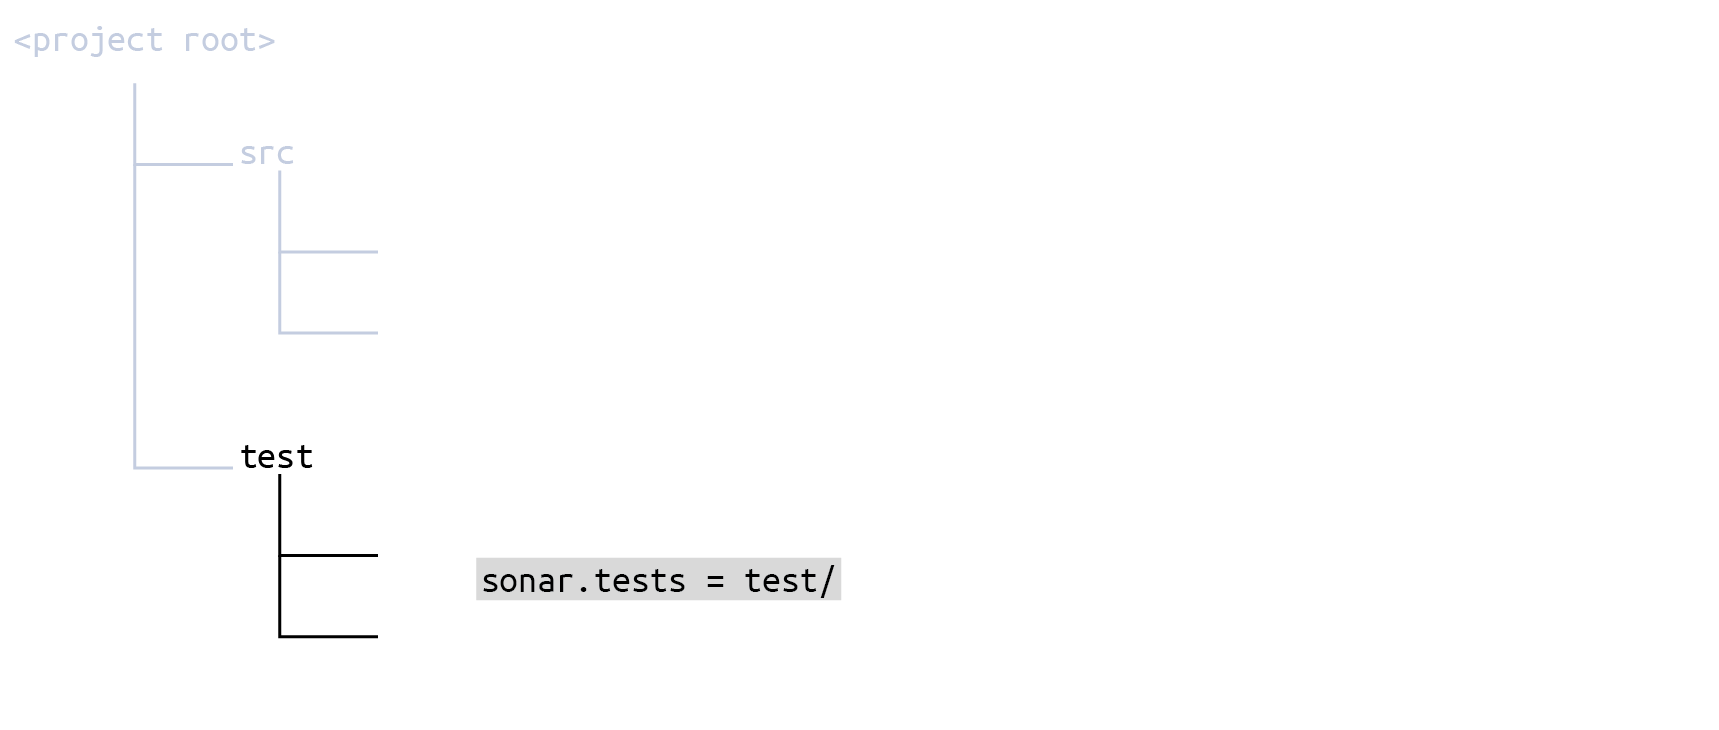 Test code is in the test/ directory.